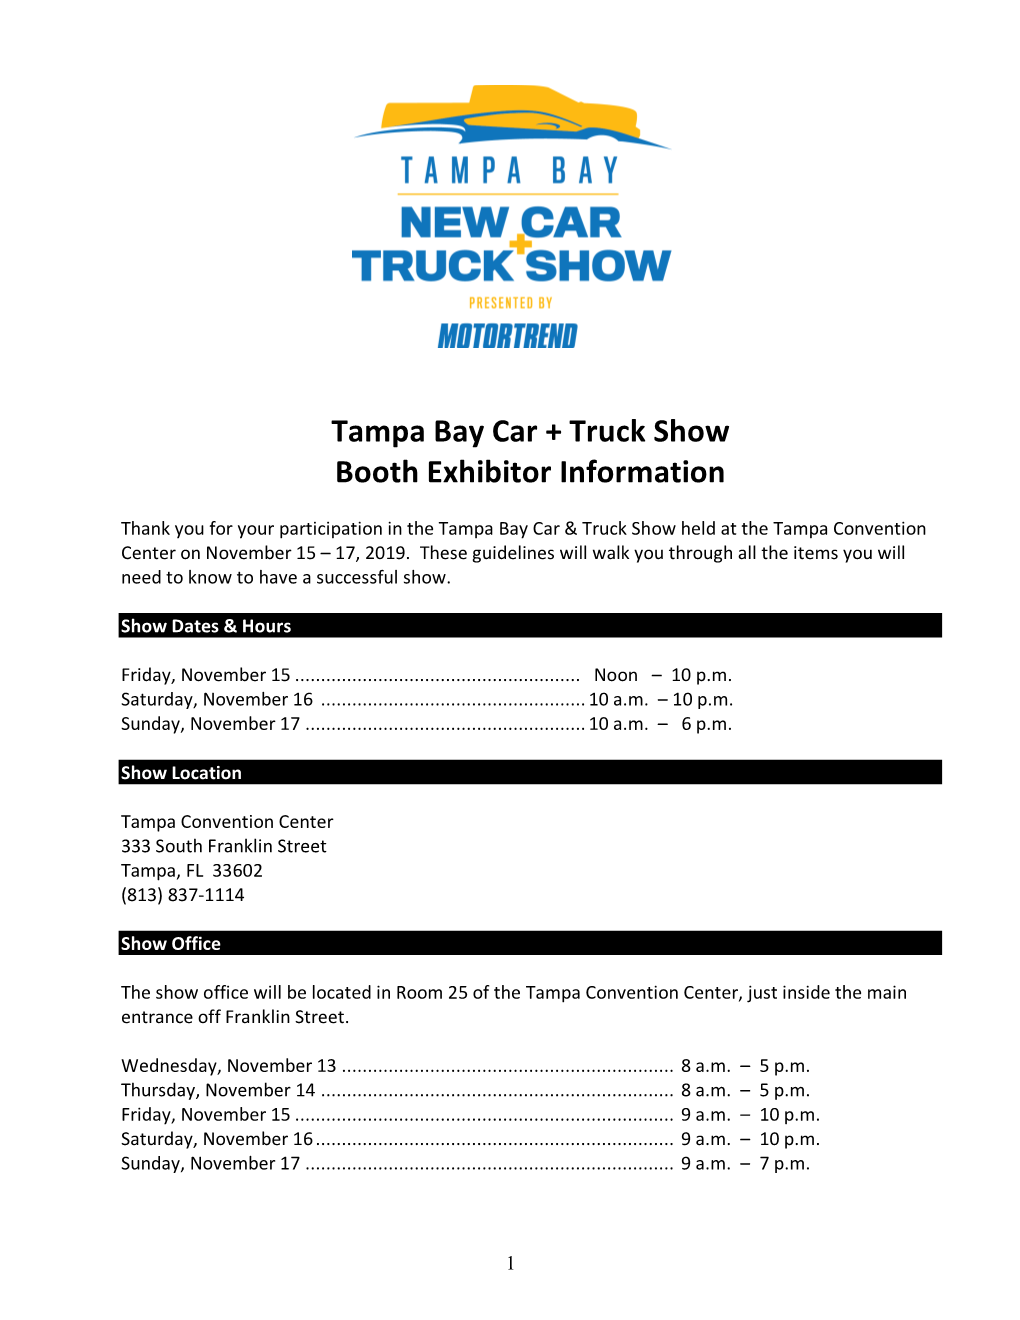 Tampa Bay Car + Truck Show Booth Exhibitor Information